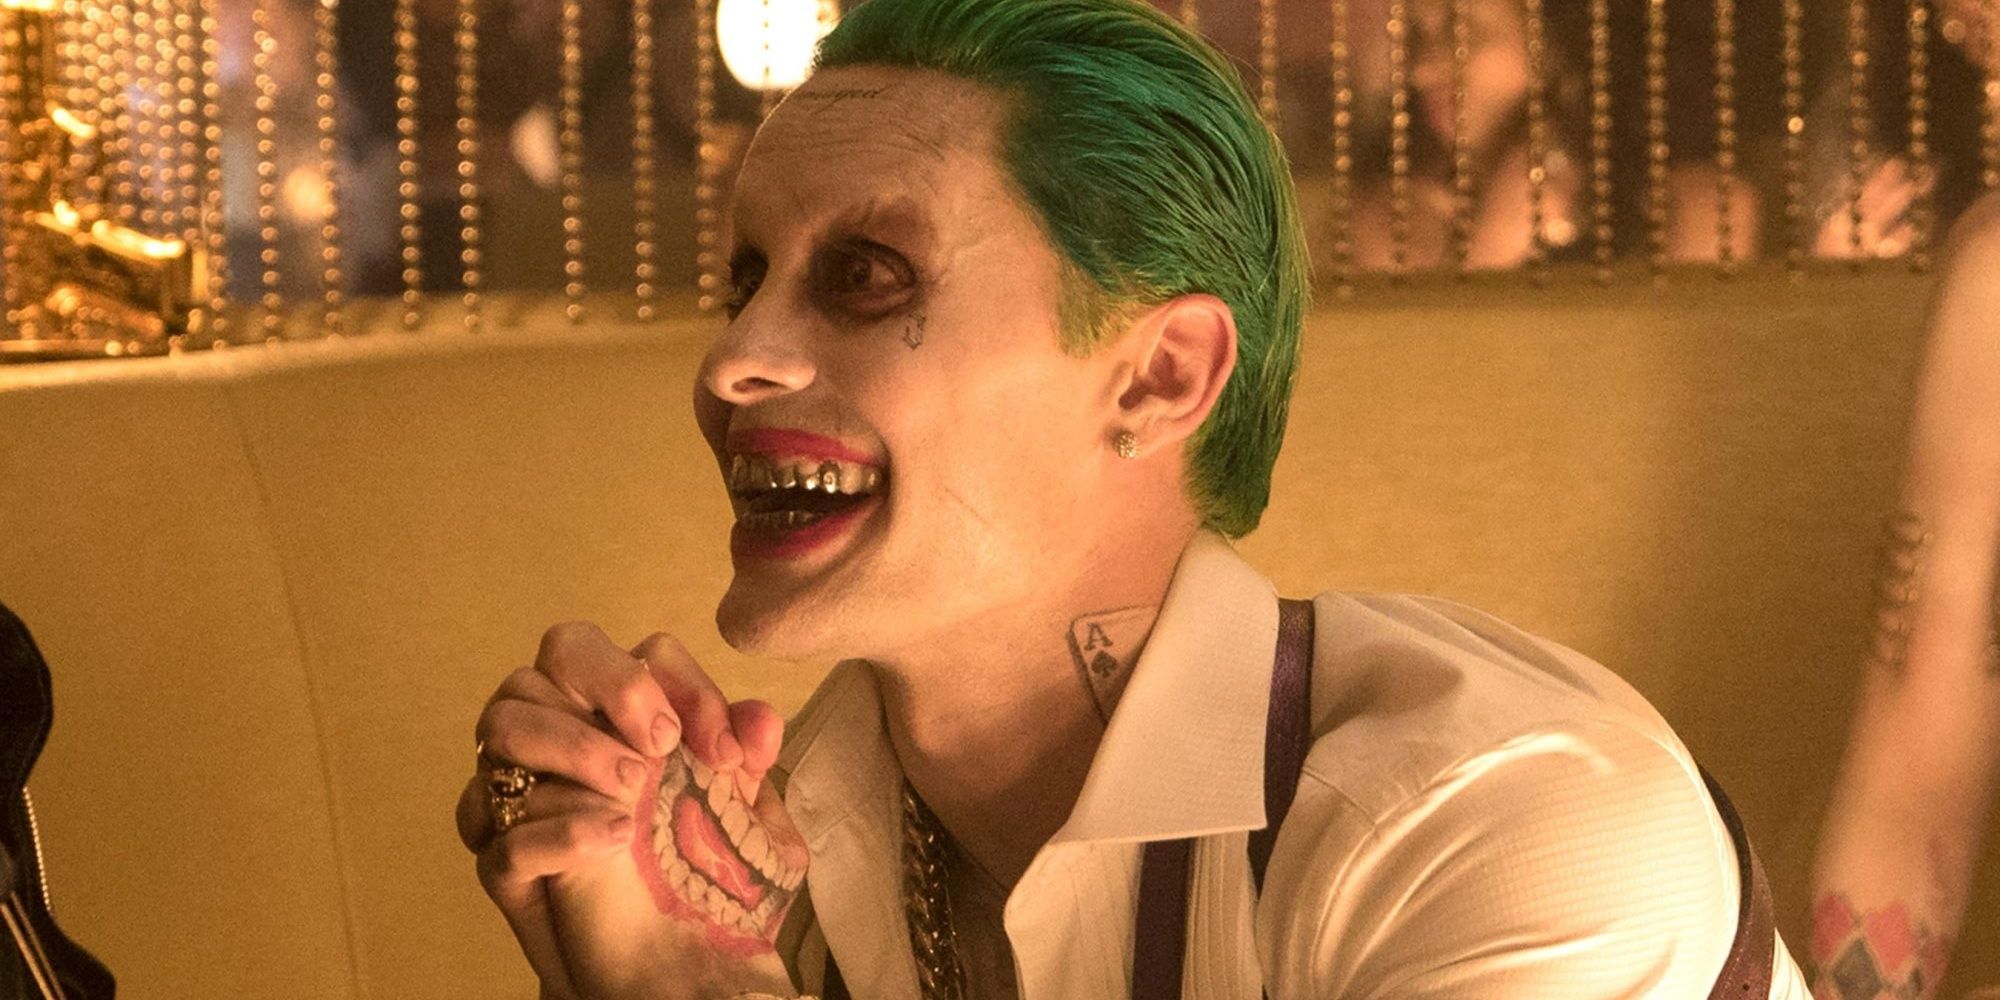 David Ayer Offers Up A New Image of Jared Leto's Joker
&amp; A Cryptic Update On Suicide Squad